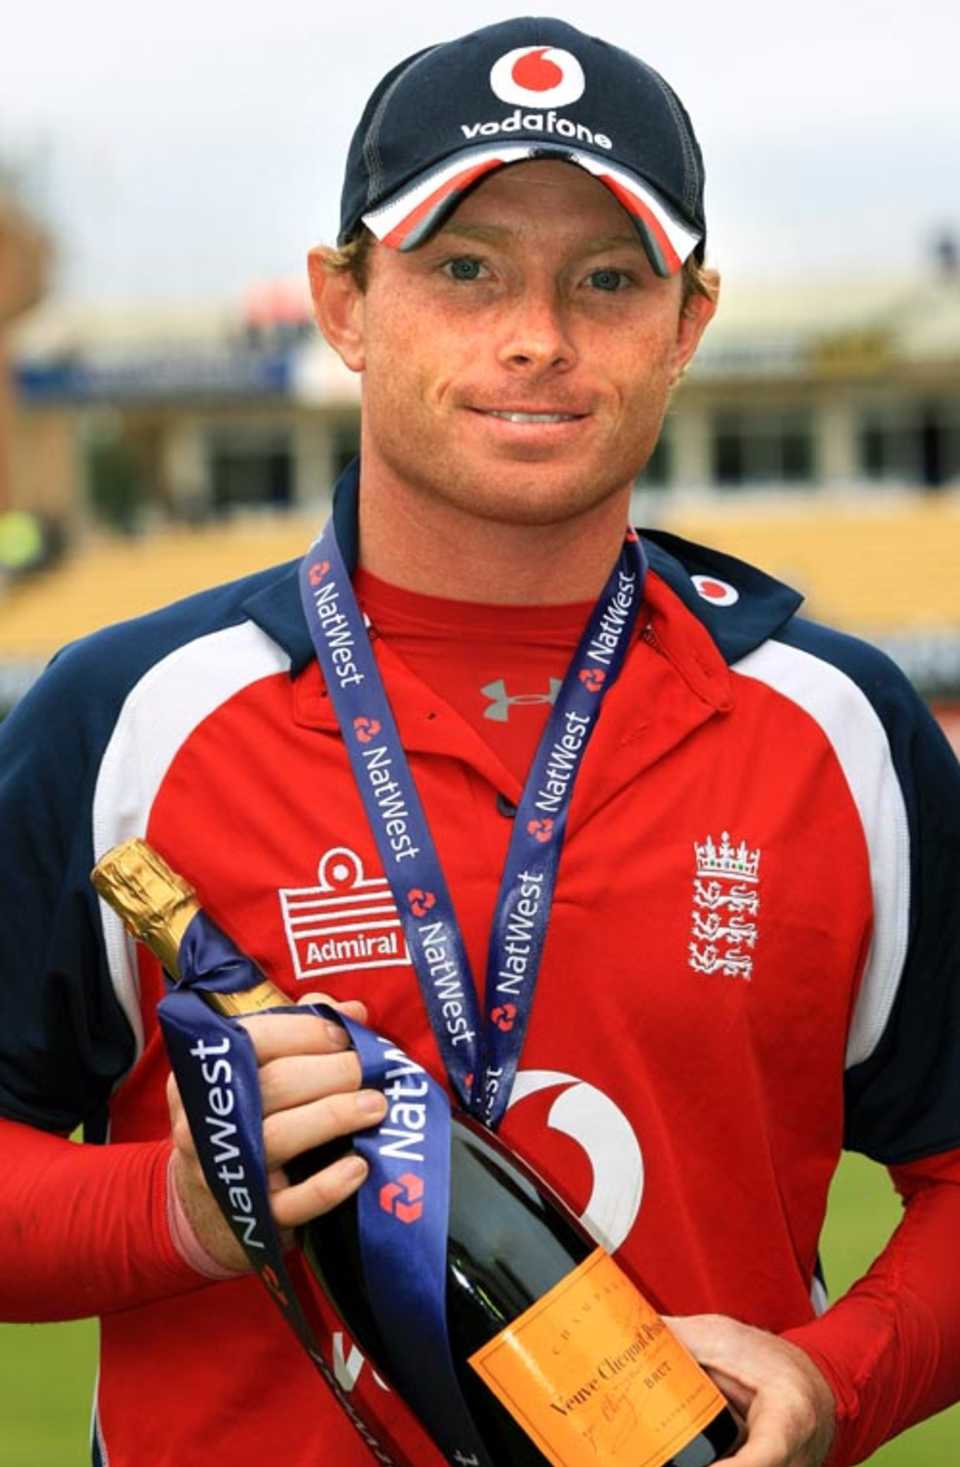 Ian Bell with his Man-of-the-Match medal and champagne, England v India, 3rd ODI, Edgbaston, August 27, 2007